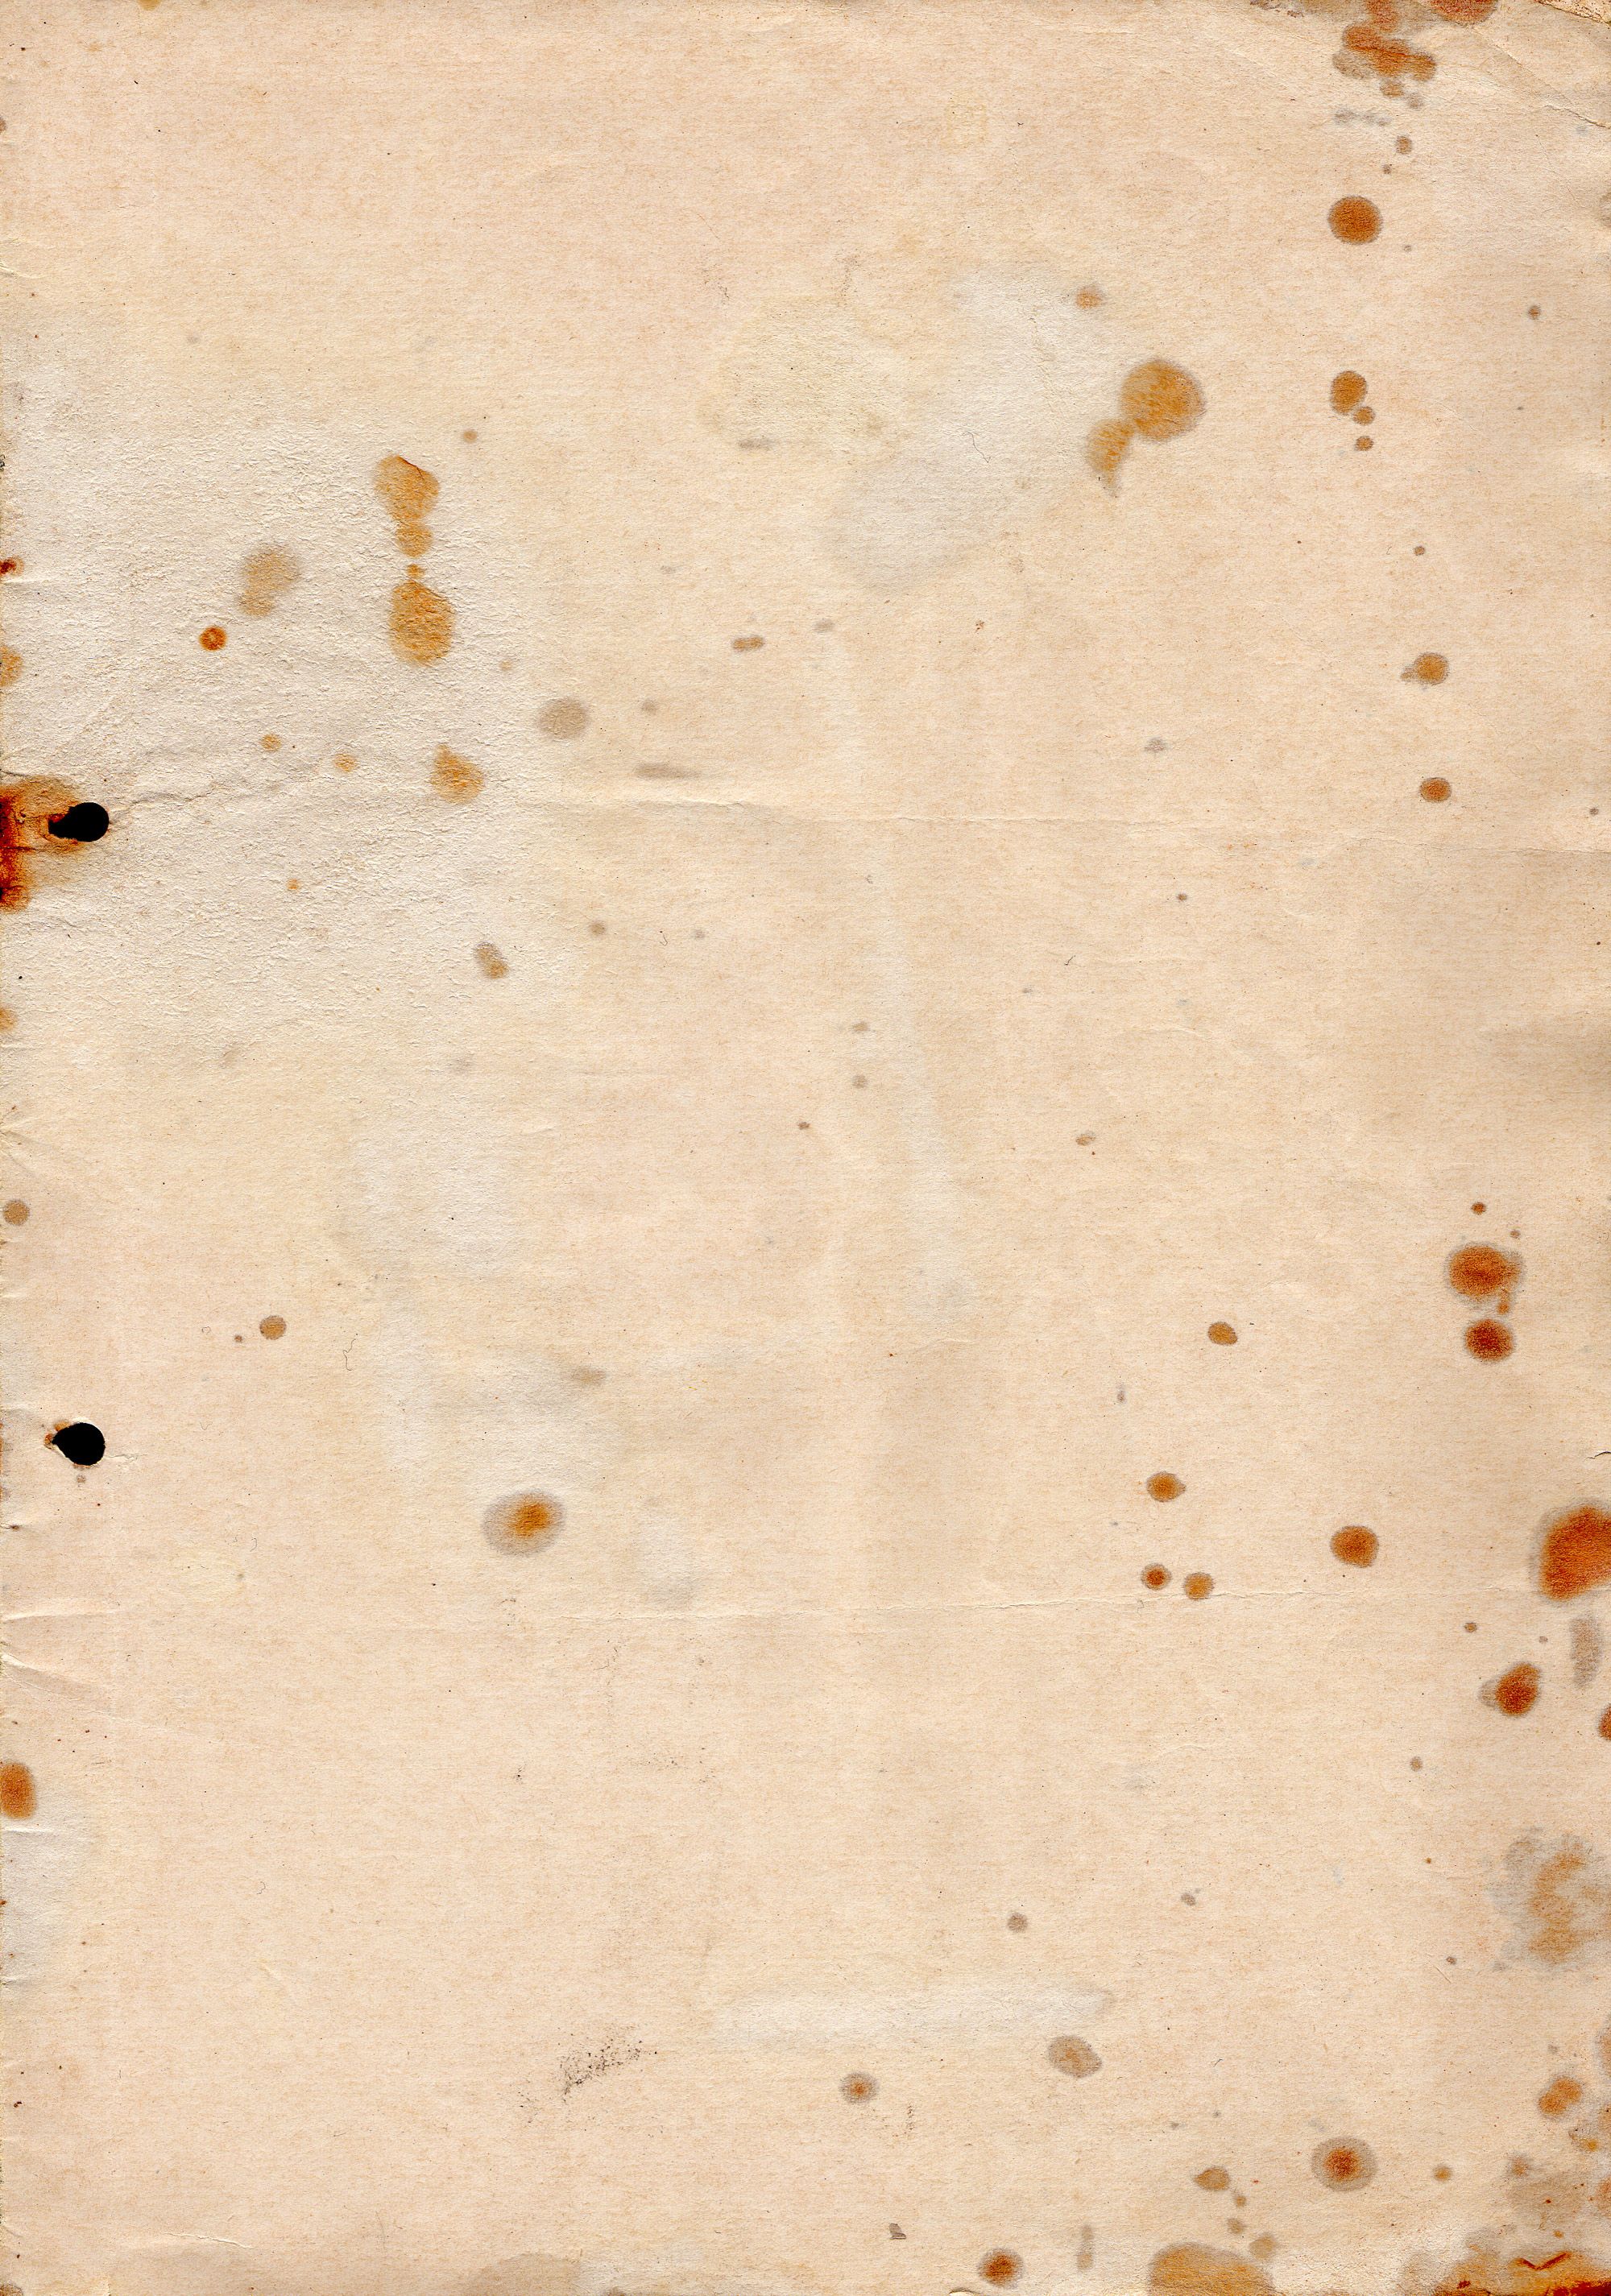 grungy_paper_v_9_by_bashcorpo.jpg (2000×2851) | Texture: Stained ...